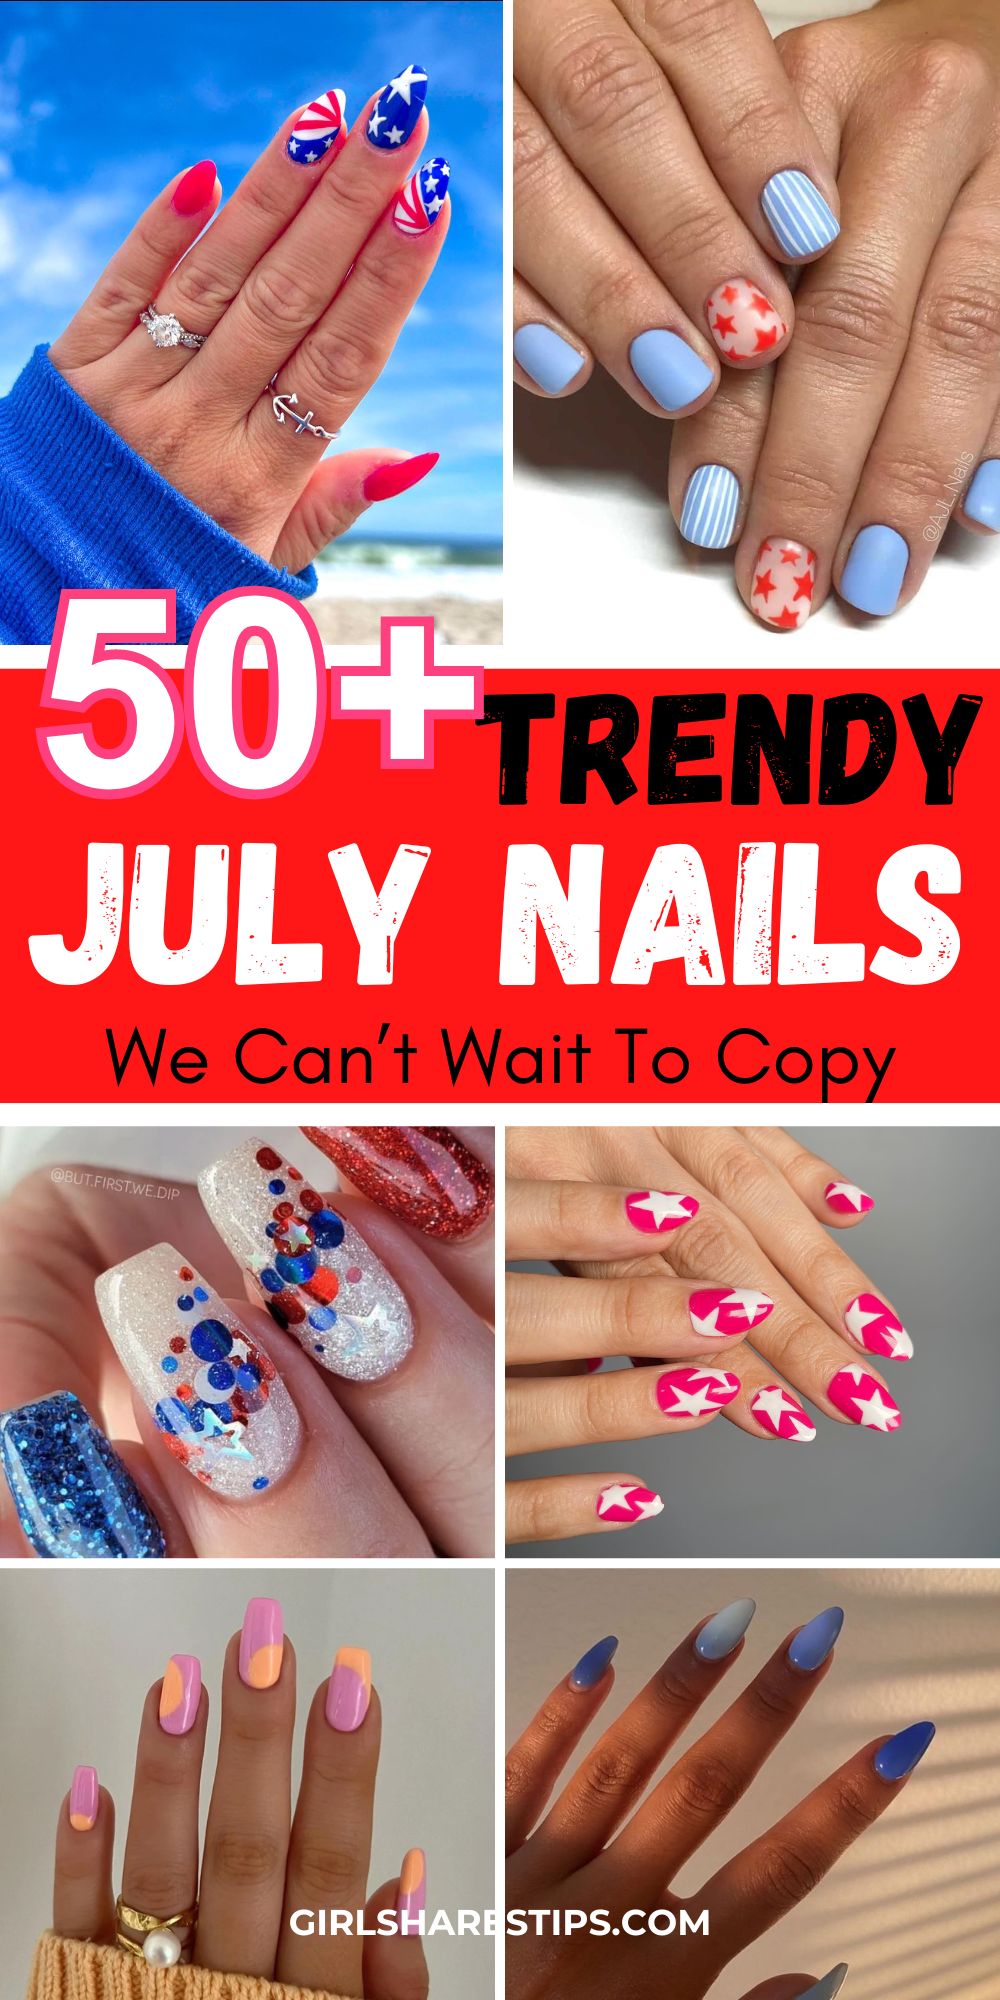 July nails collage